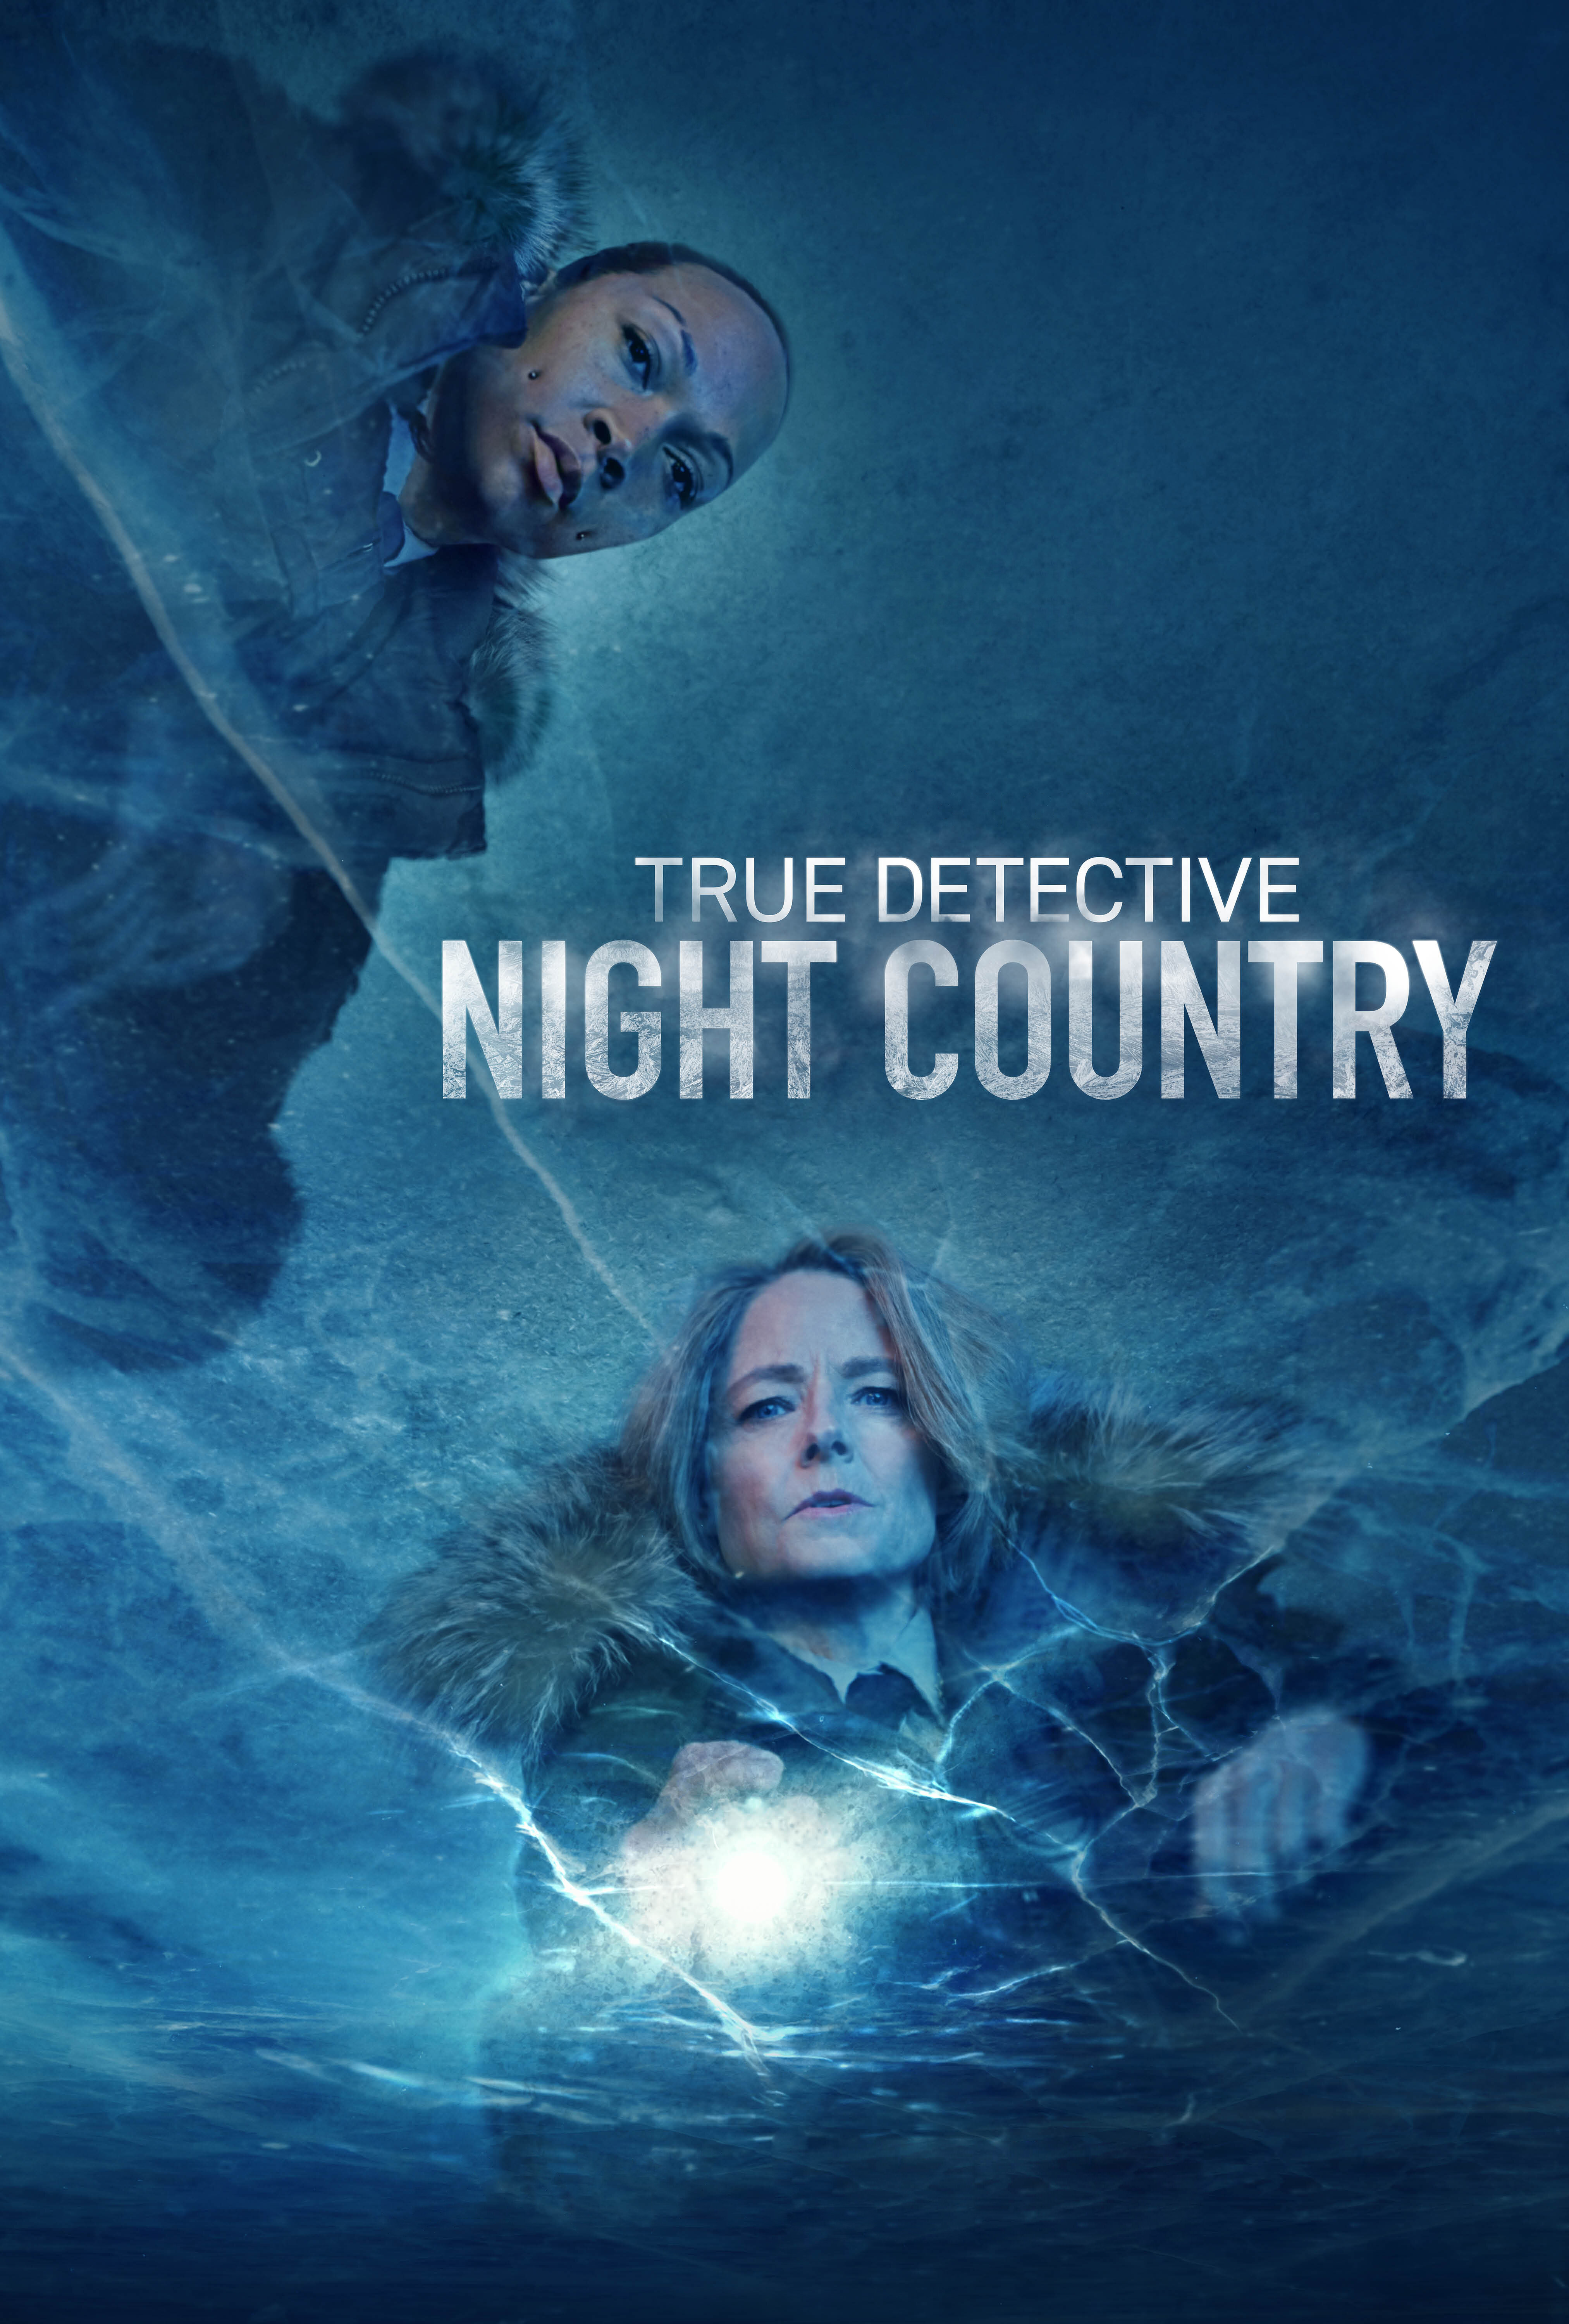 True Detective S04E04 Night Country Part 4 2160p MAX WEB-DL DDP5 1 HDR DoVi x265-NTb